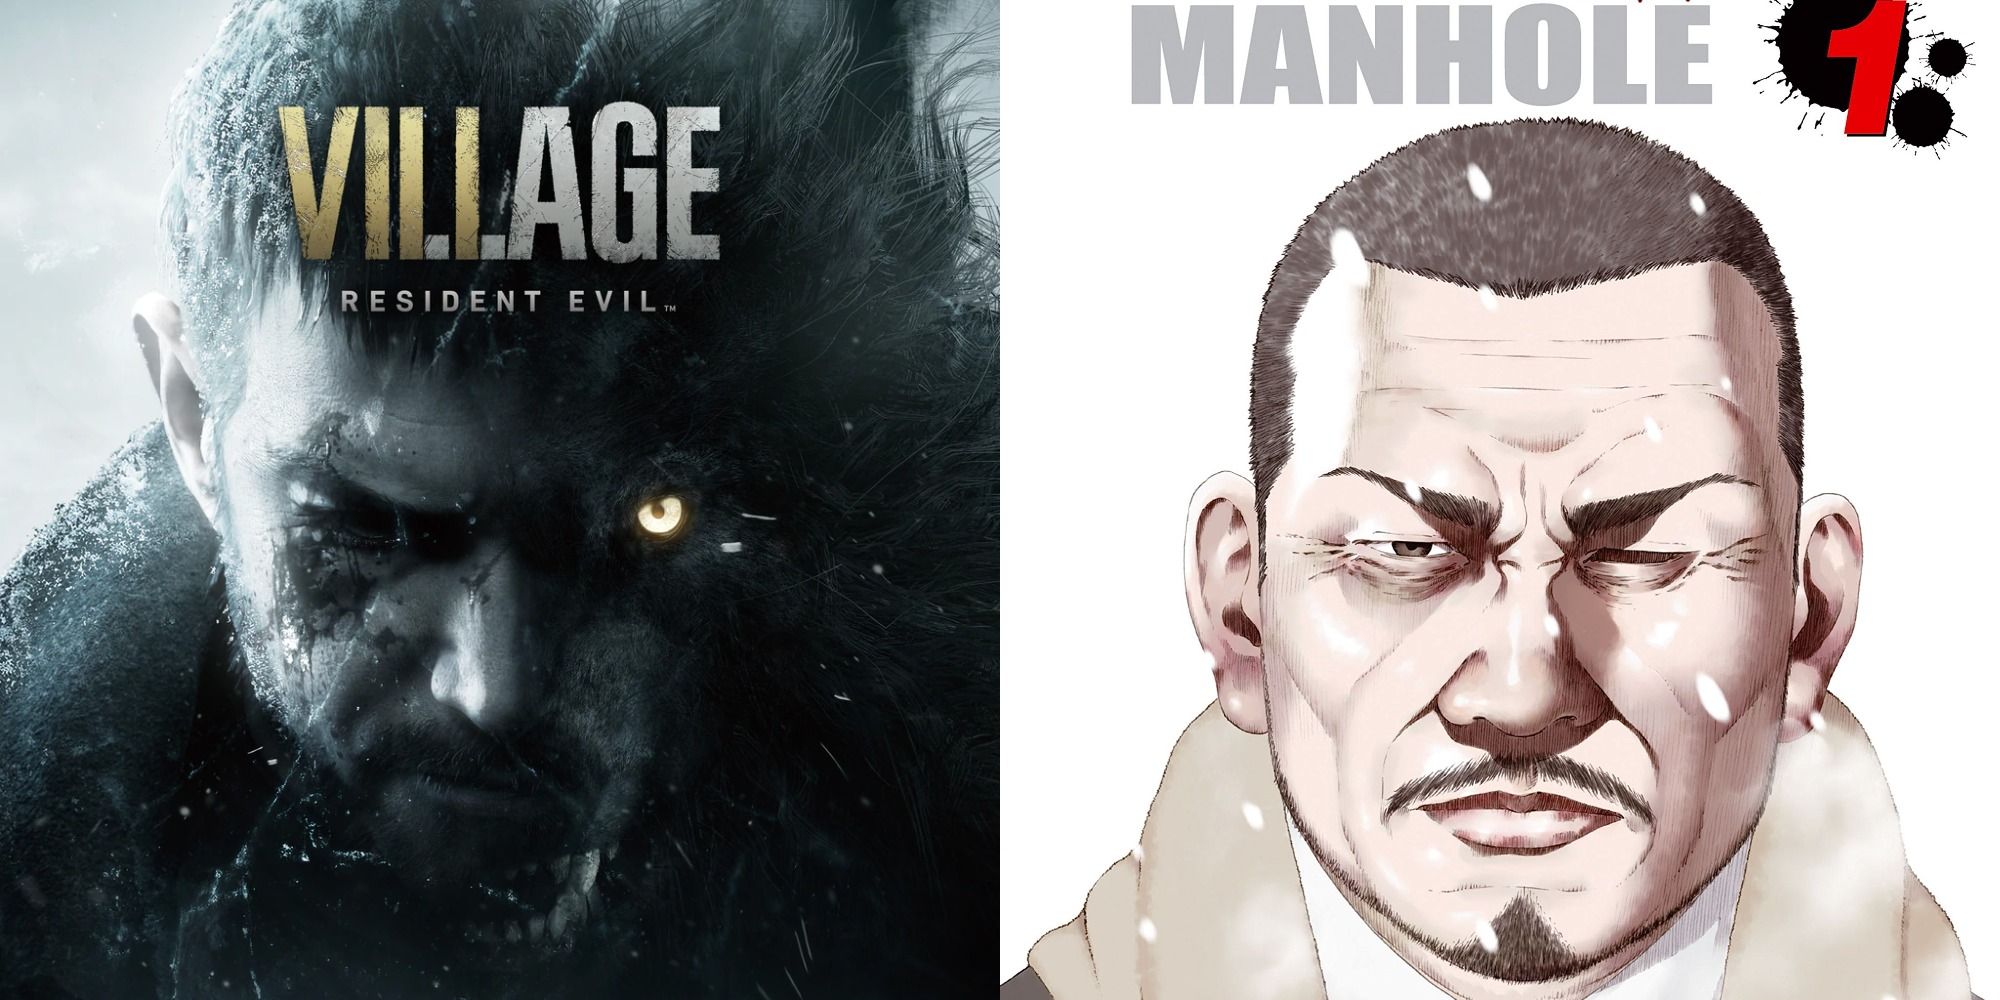 Split image showing covers for Resident Evil Village and the Manhole manga